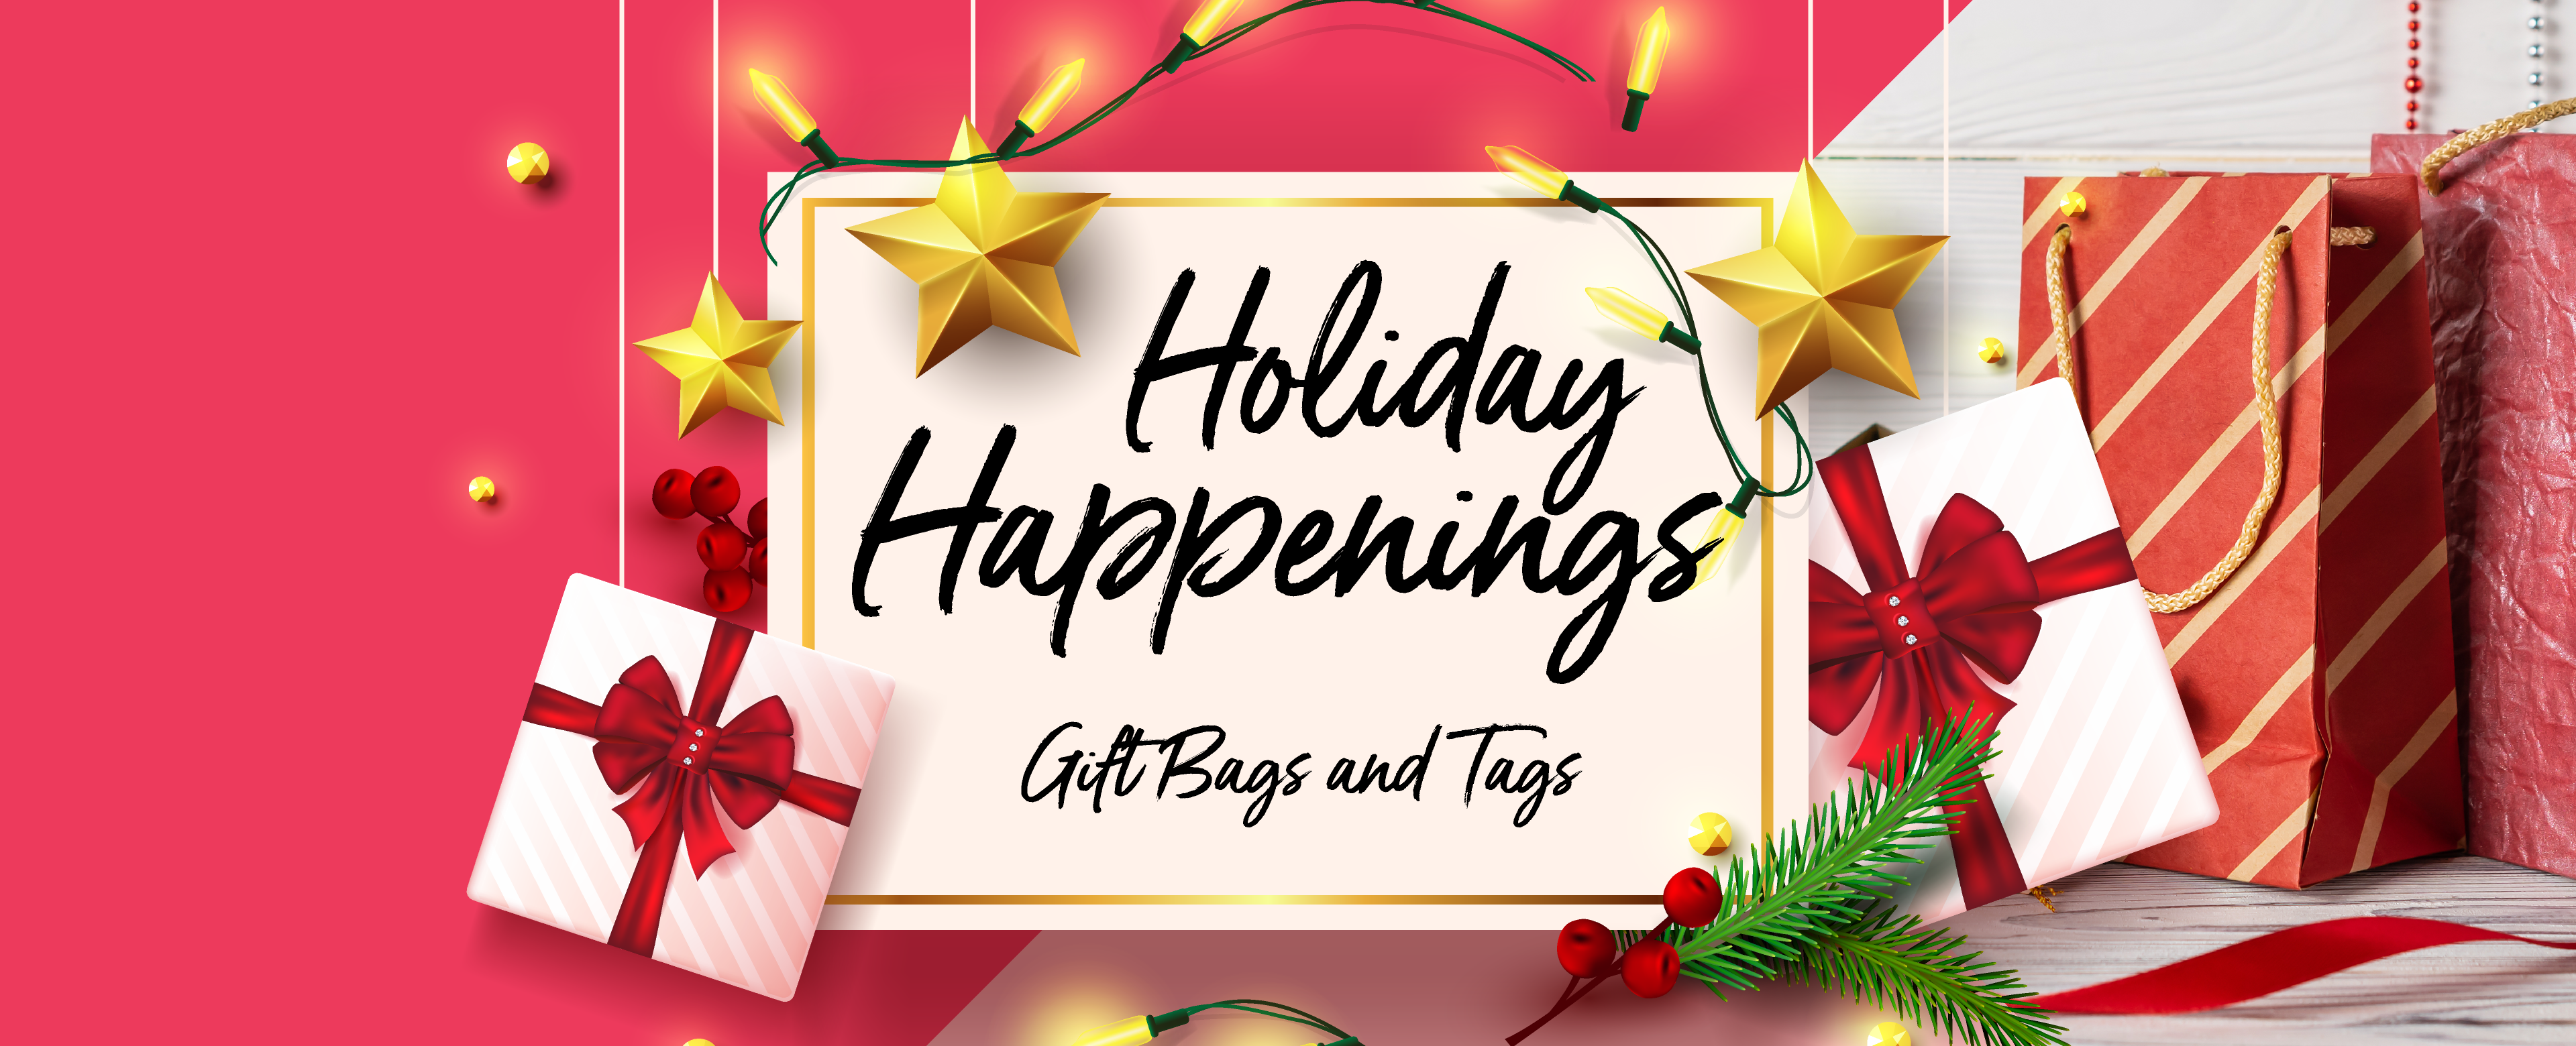 Holiday Happenings